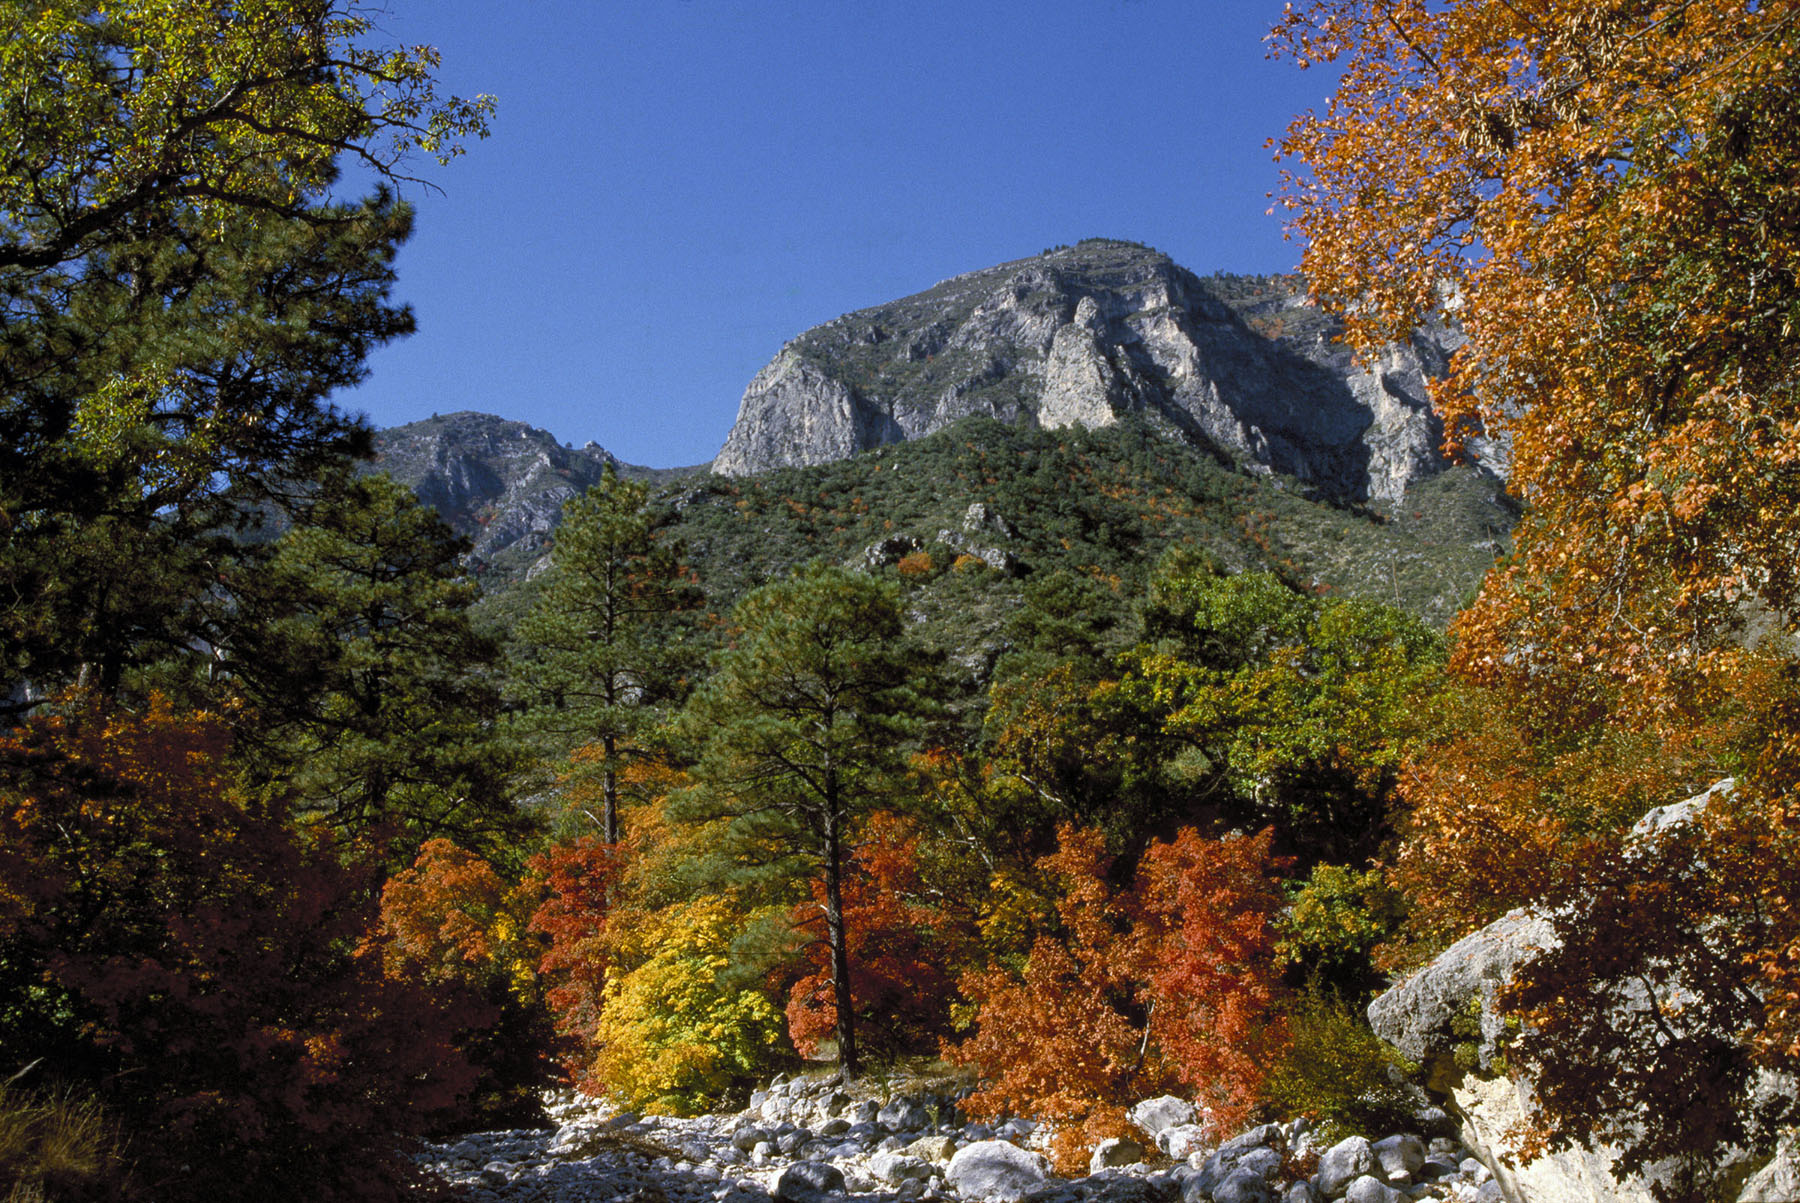 Fall foliage in McKittrick Canyon at Guadalupe Mountains National Park.